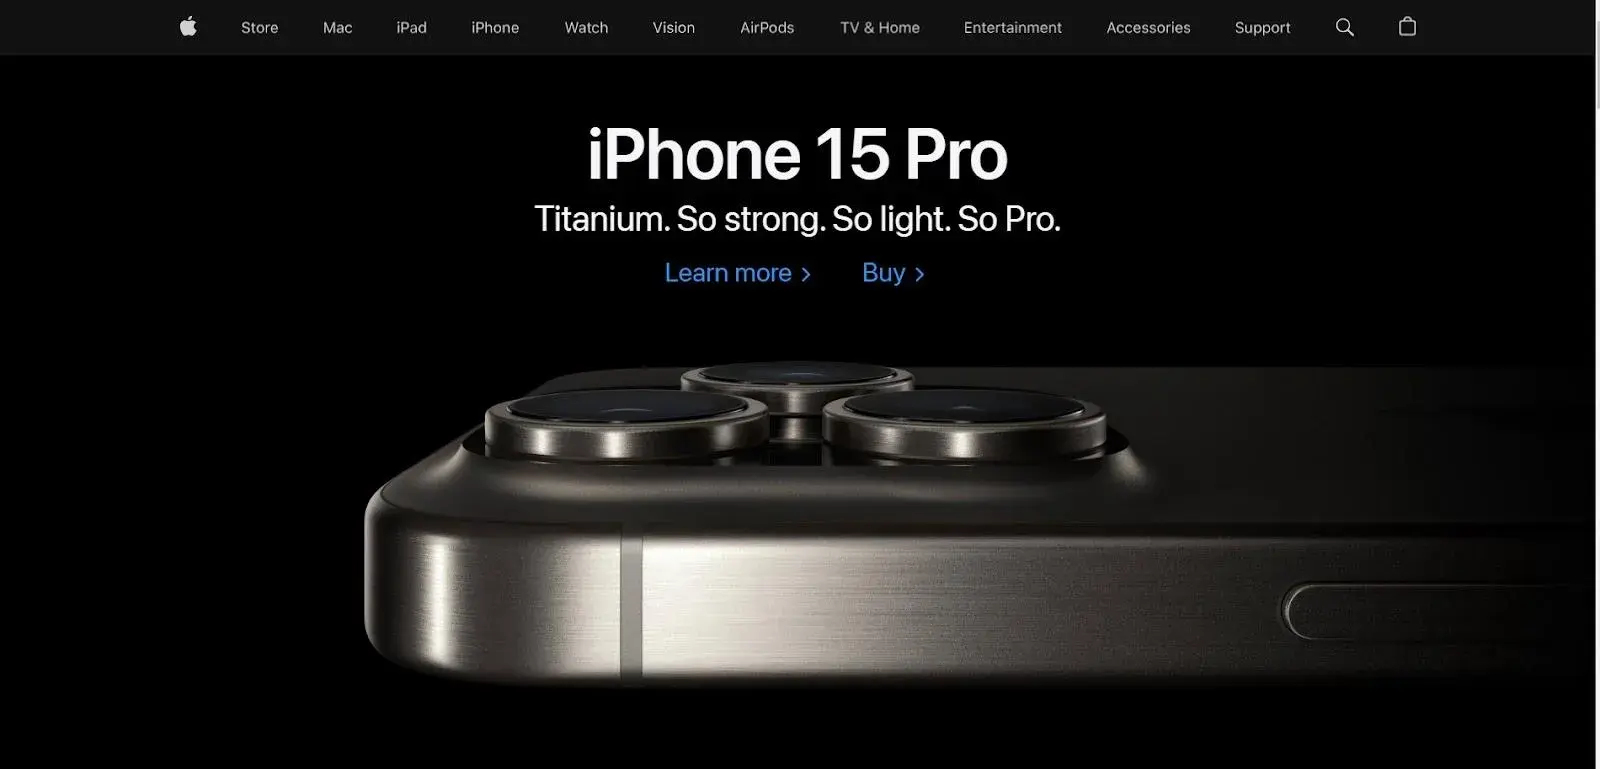 Apple’s website design layout uses a sticky header and a sectional layout